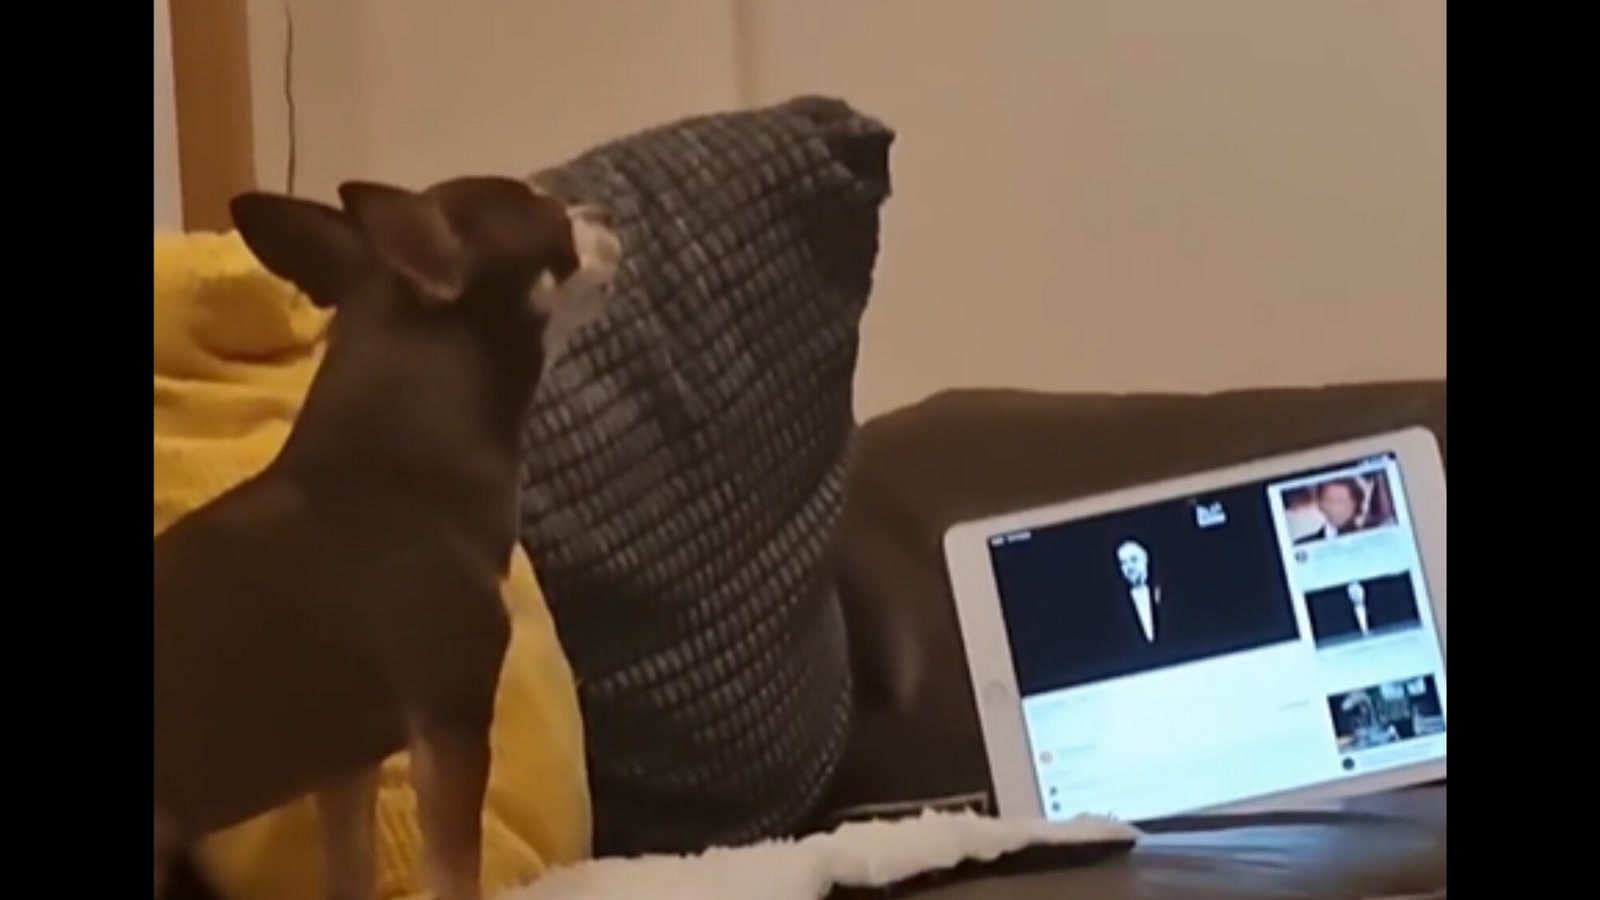 Chihuahua sings along the theme of The Godfather. Watch hilarious video